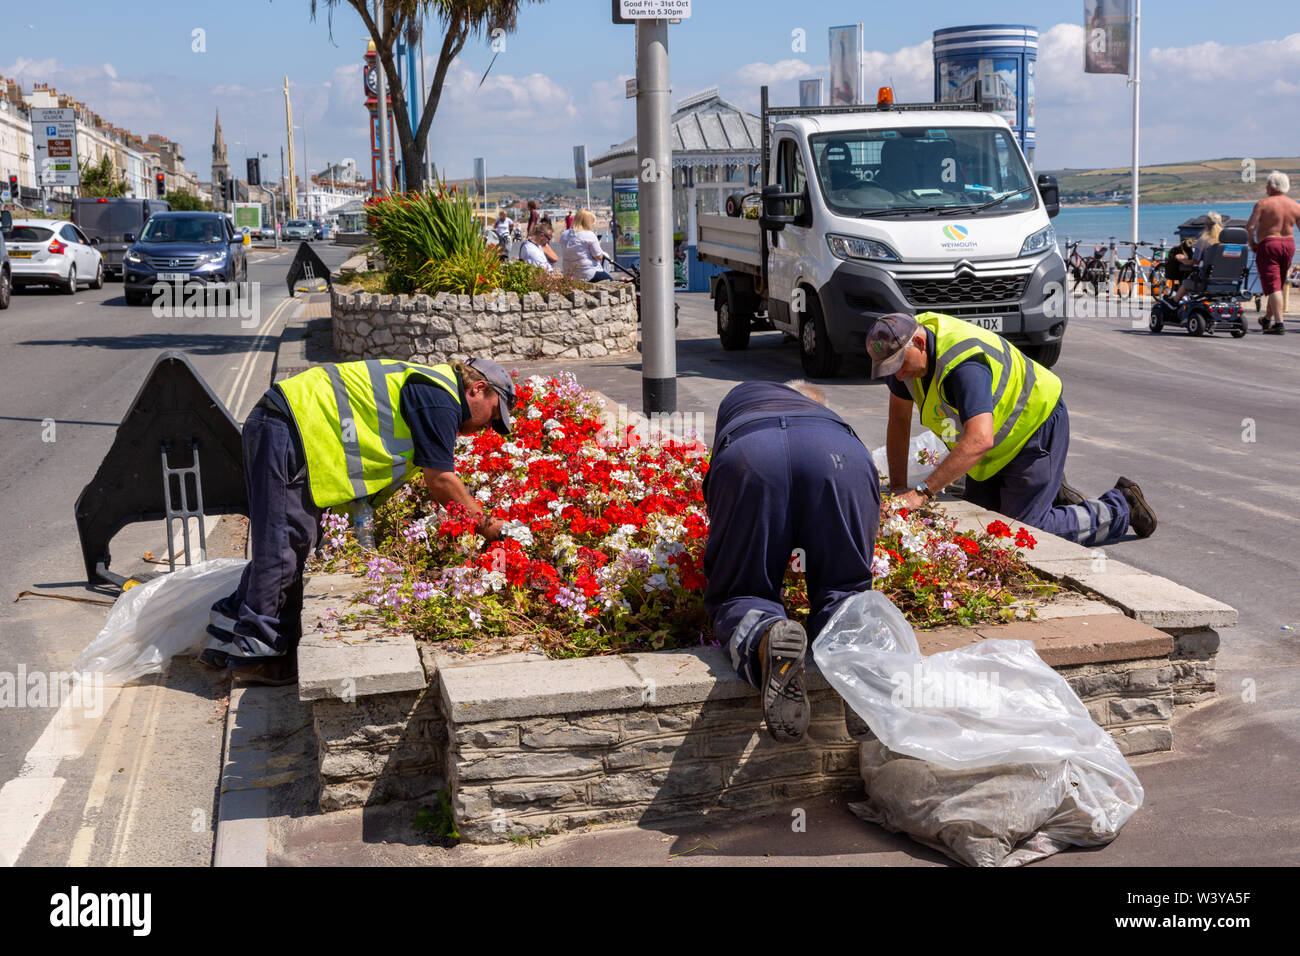 Council worker tending to a flower bed, Weymouth, Dorset UK Stock Photo